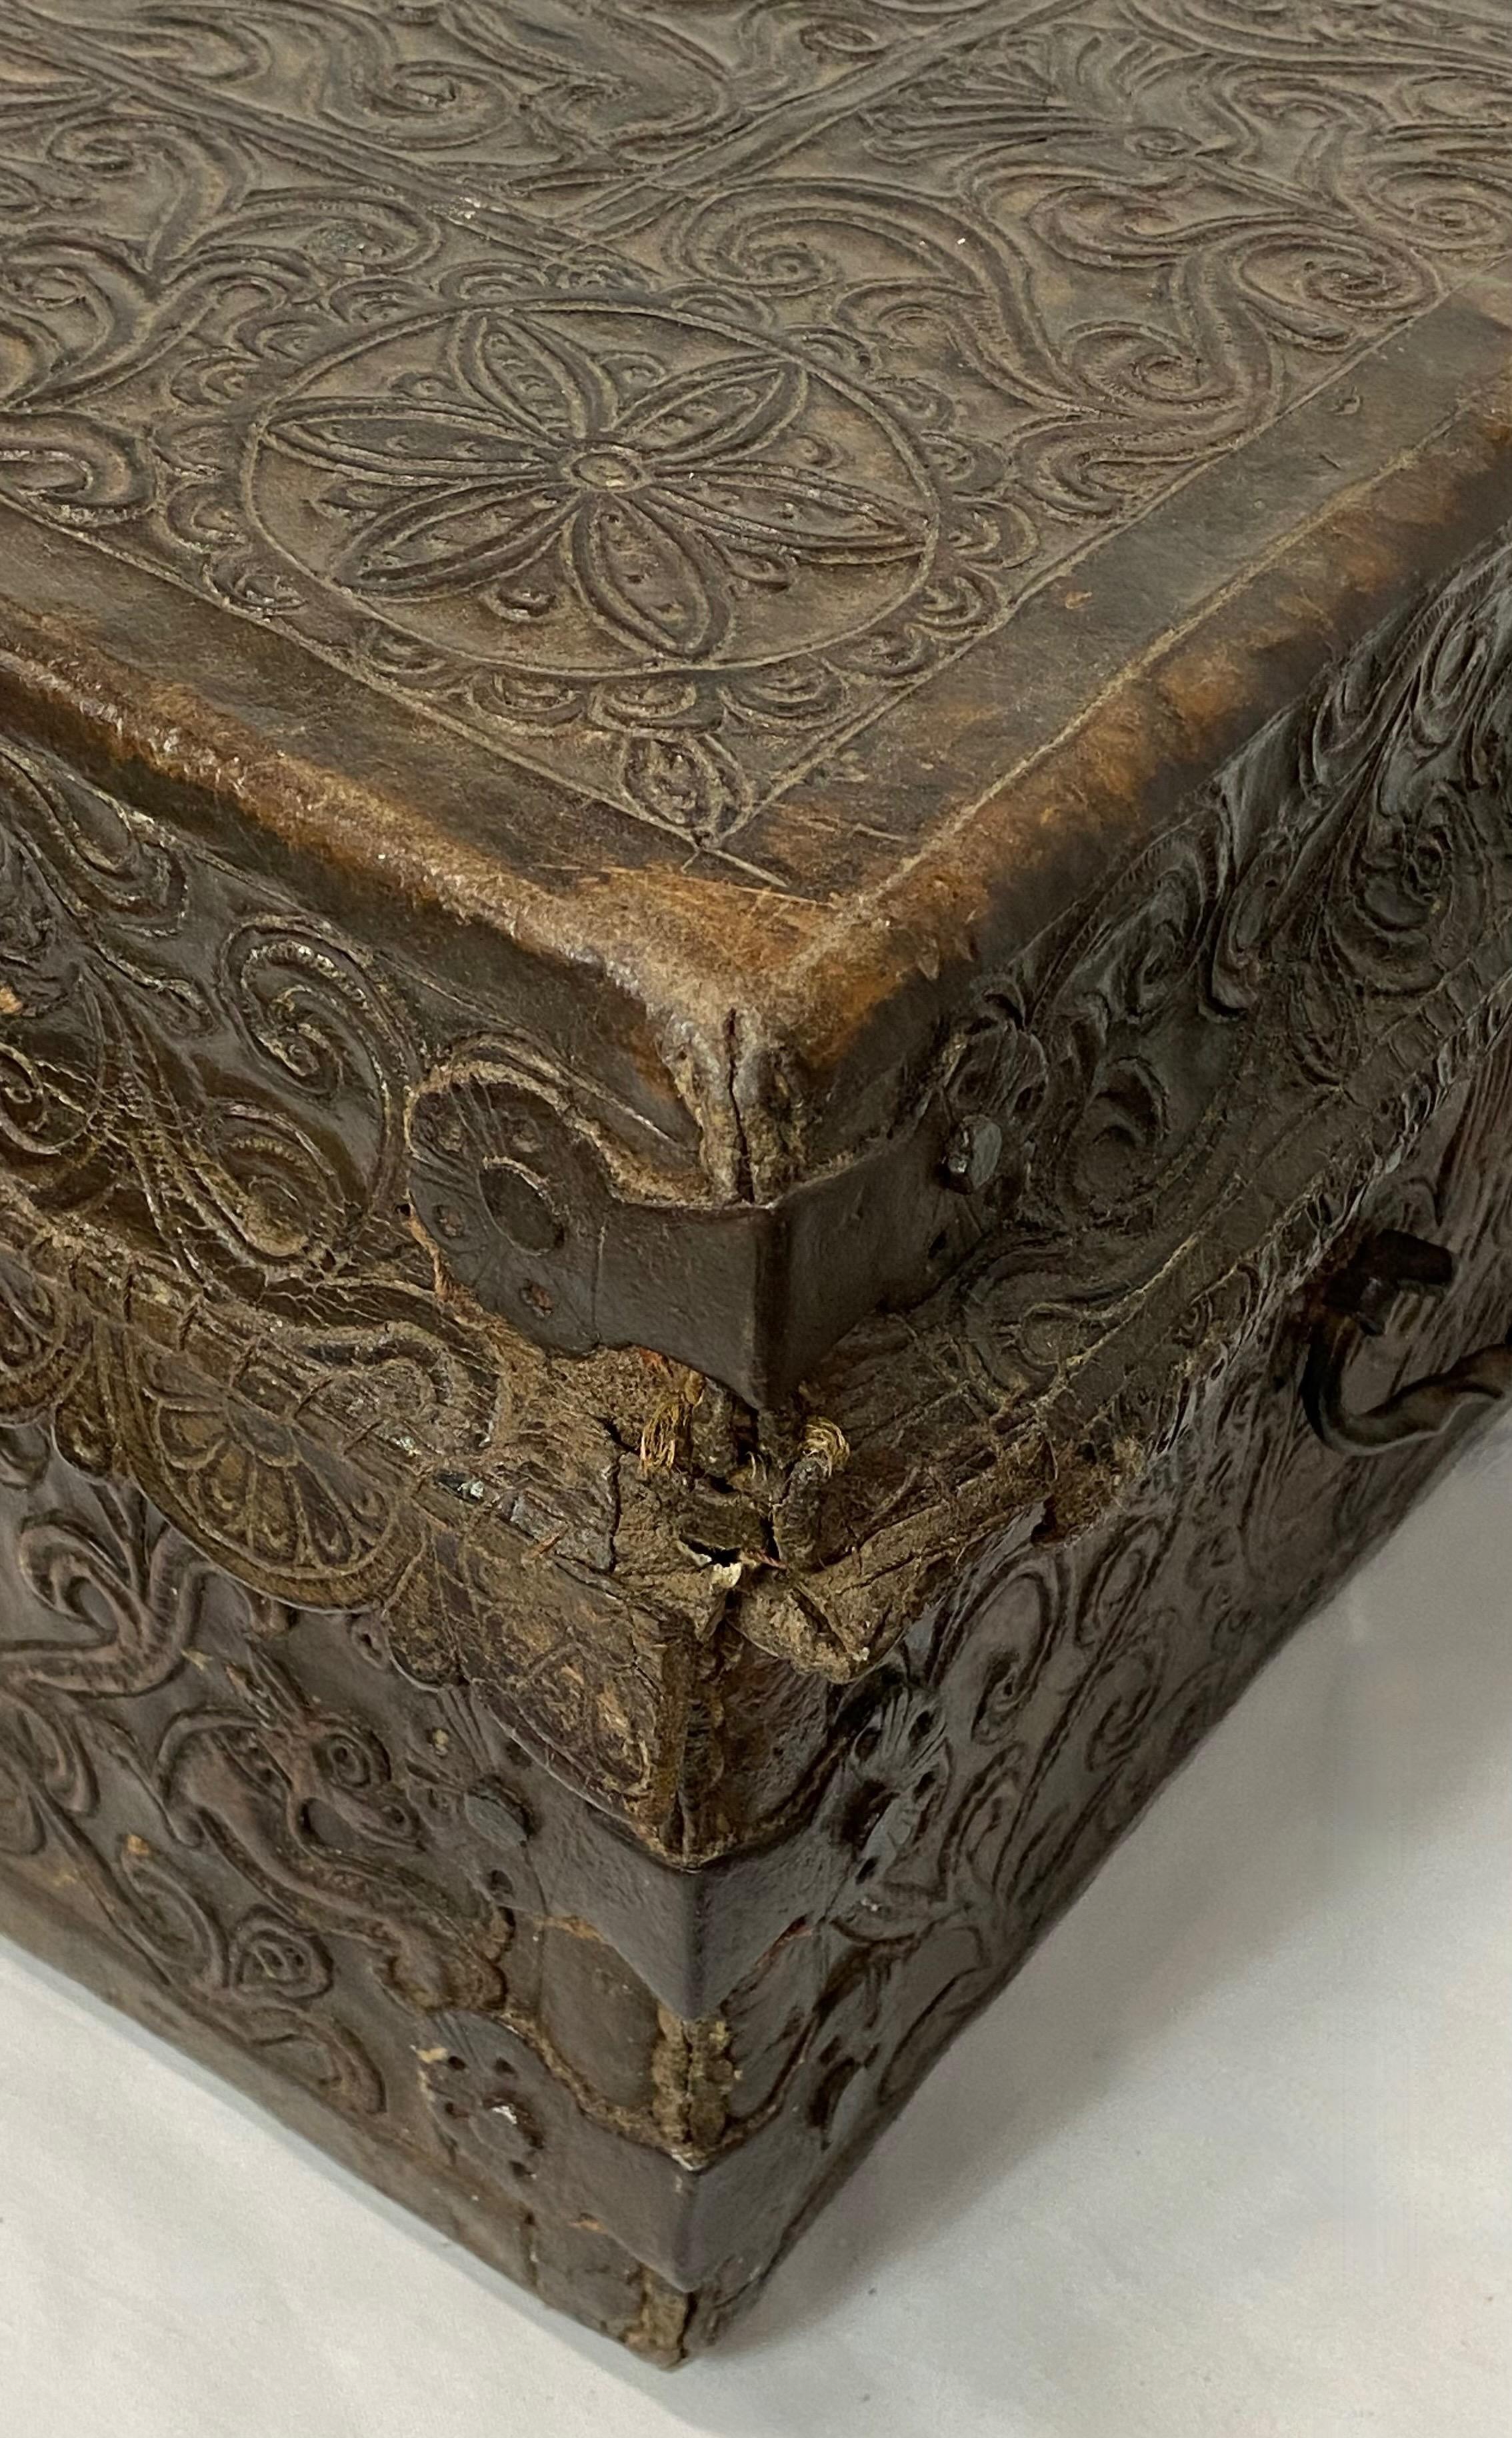 Hand-Crafted Early 18th Century Spanish Colonial Tooled Leather Petaca Document Box